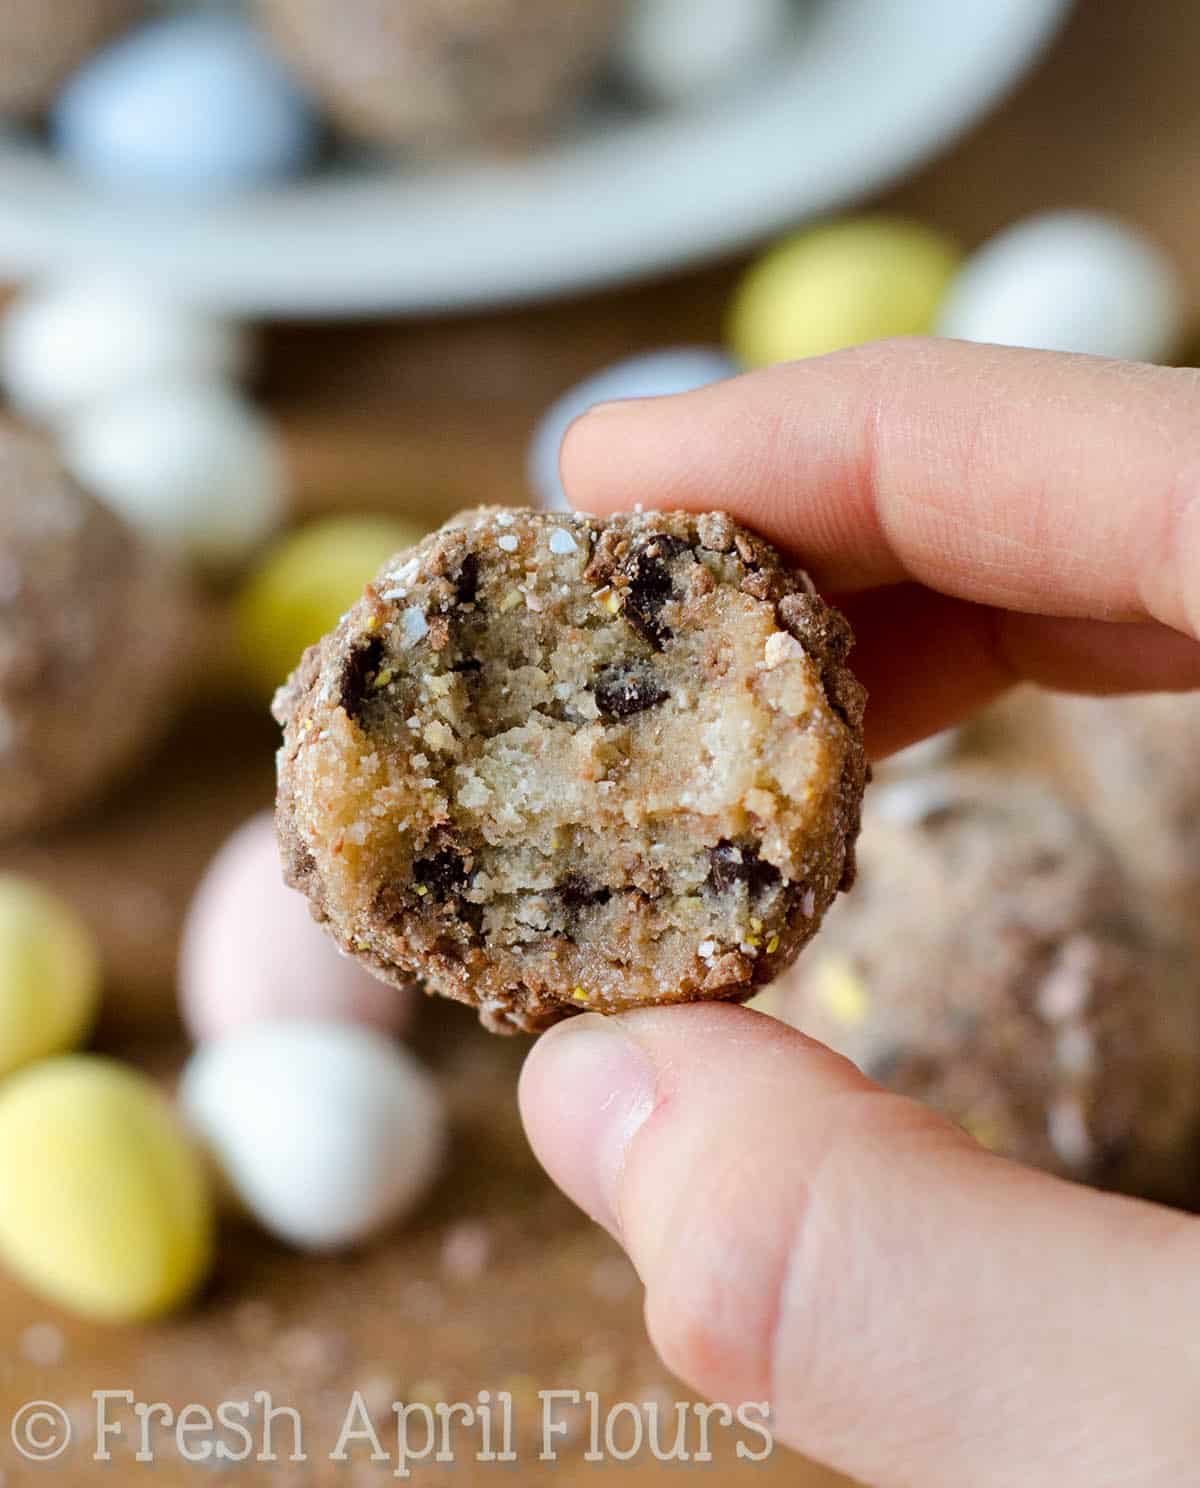 Cadbury Egg Cookie Dough BitesL Eggless and safe-to-eat chocolate chip cookie dough balls filled and coated with crunchy pieces of Cadbury Mini Eggs. The perfect treat for Easter! via @frshaprilflours